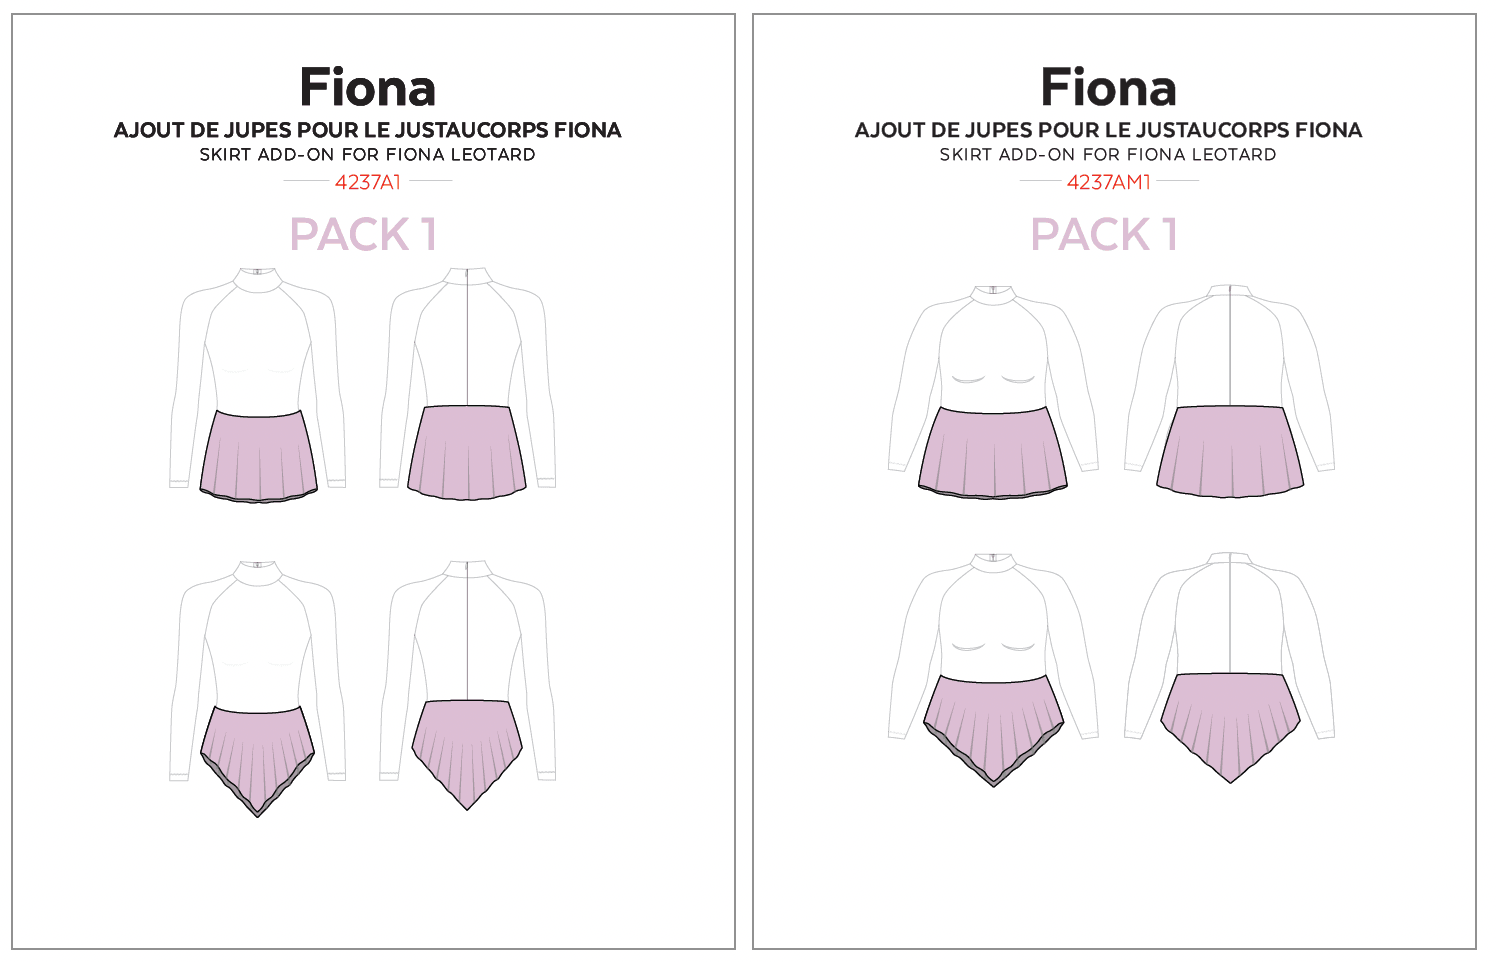 Fiona skirt add-on - Pack 1 details